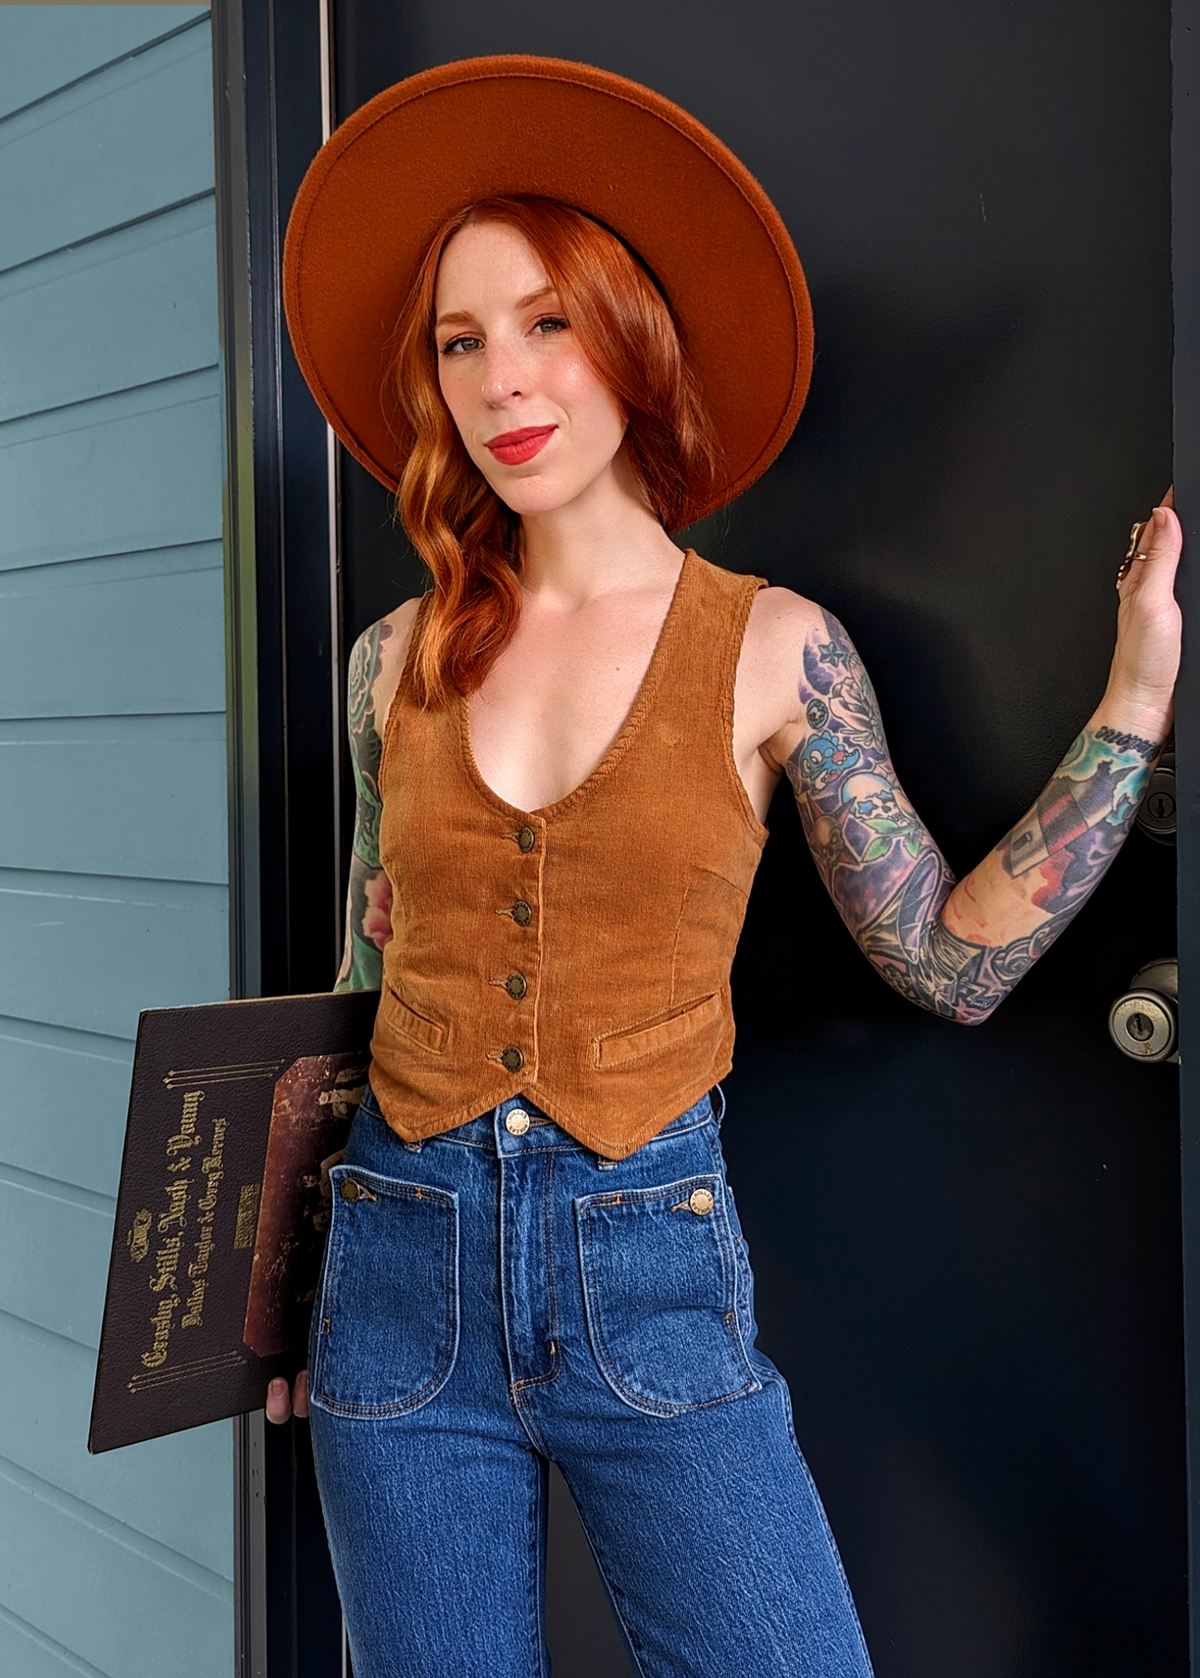 Rolla's Jeans Tan Corduroy Dallas Vest. 70s inspired vest featuring a v-neckline, button front, and adjustable buckle back. 